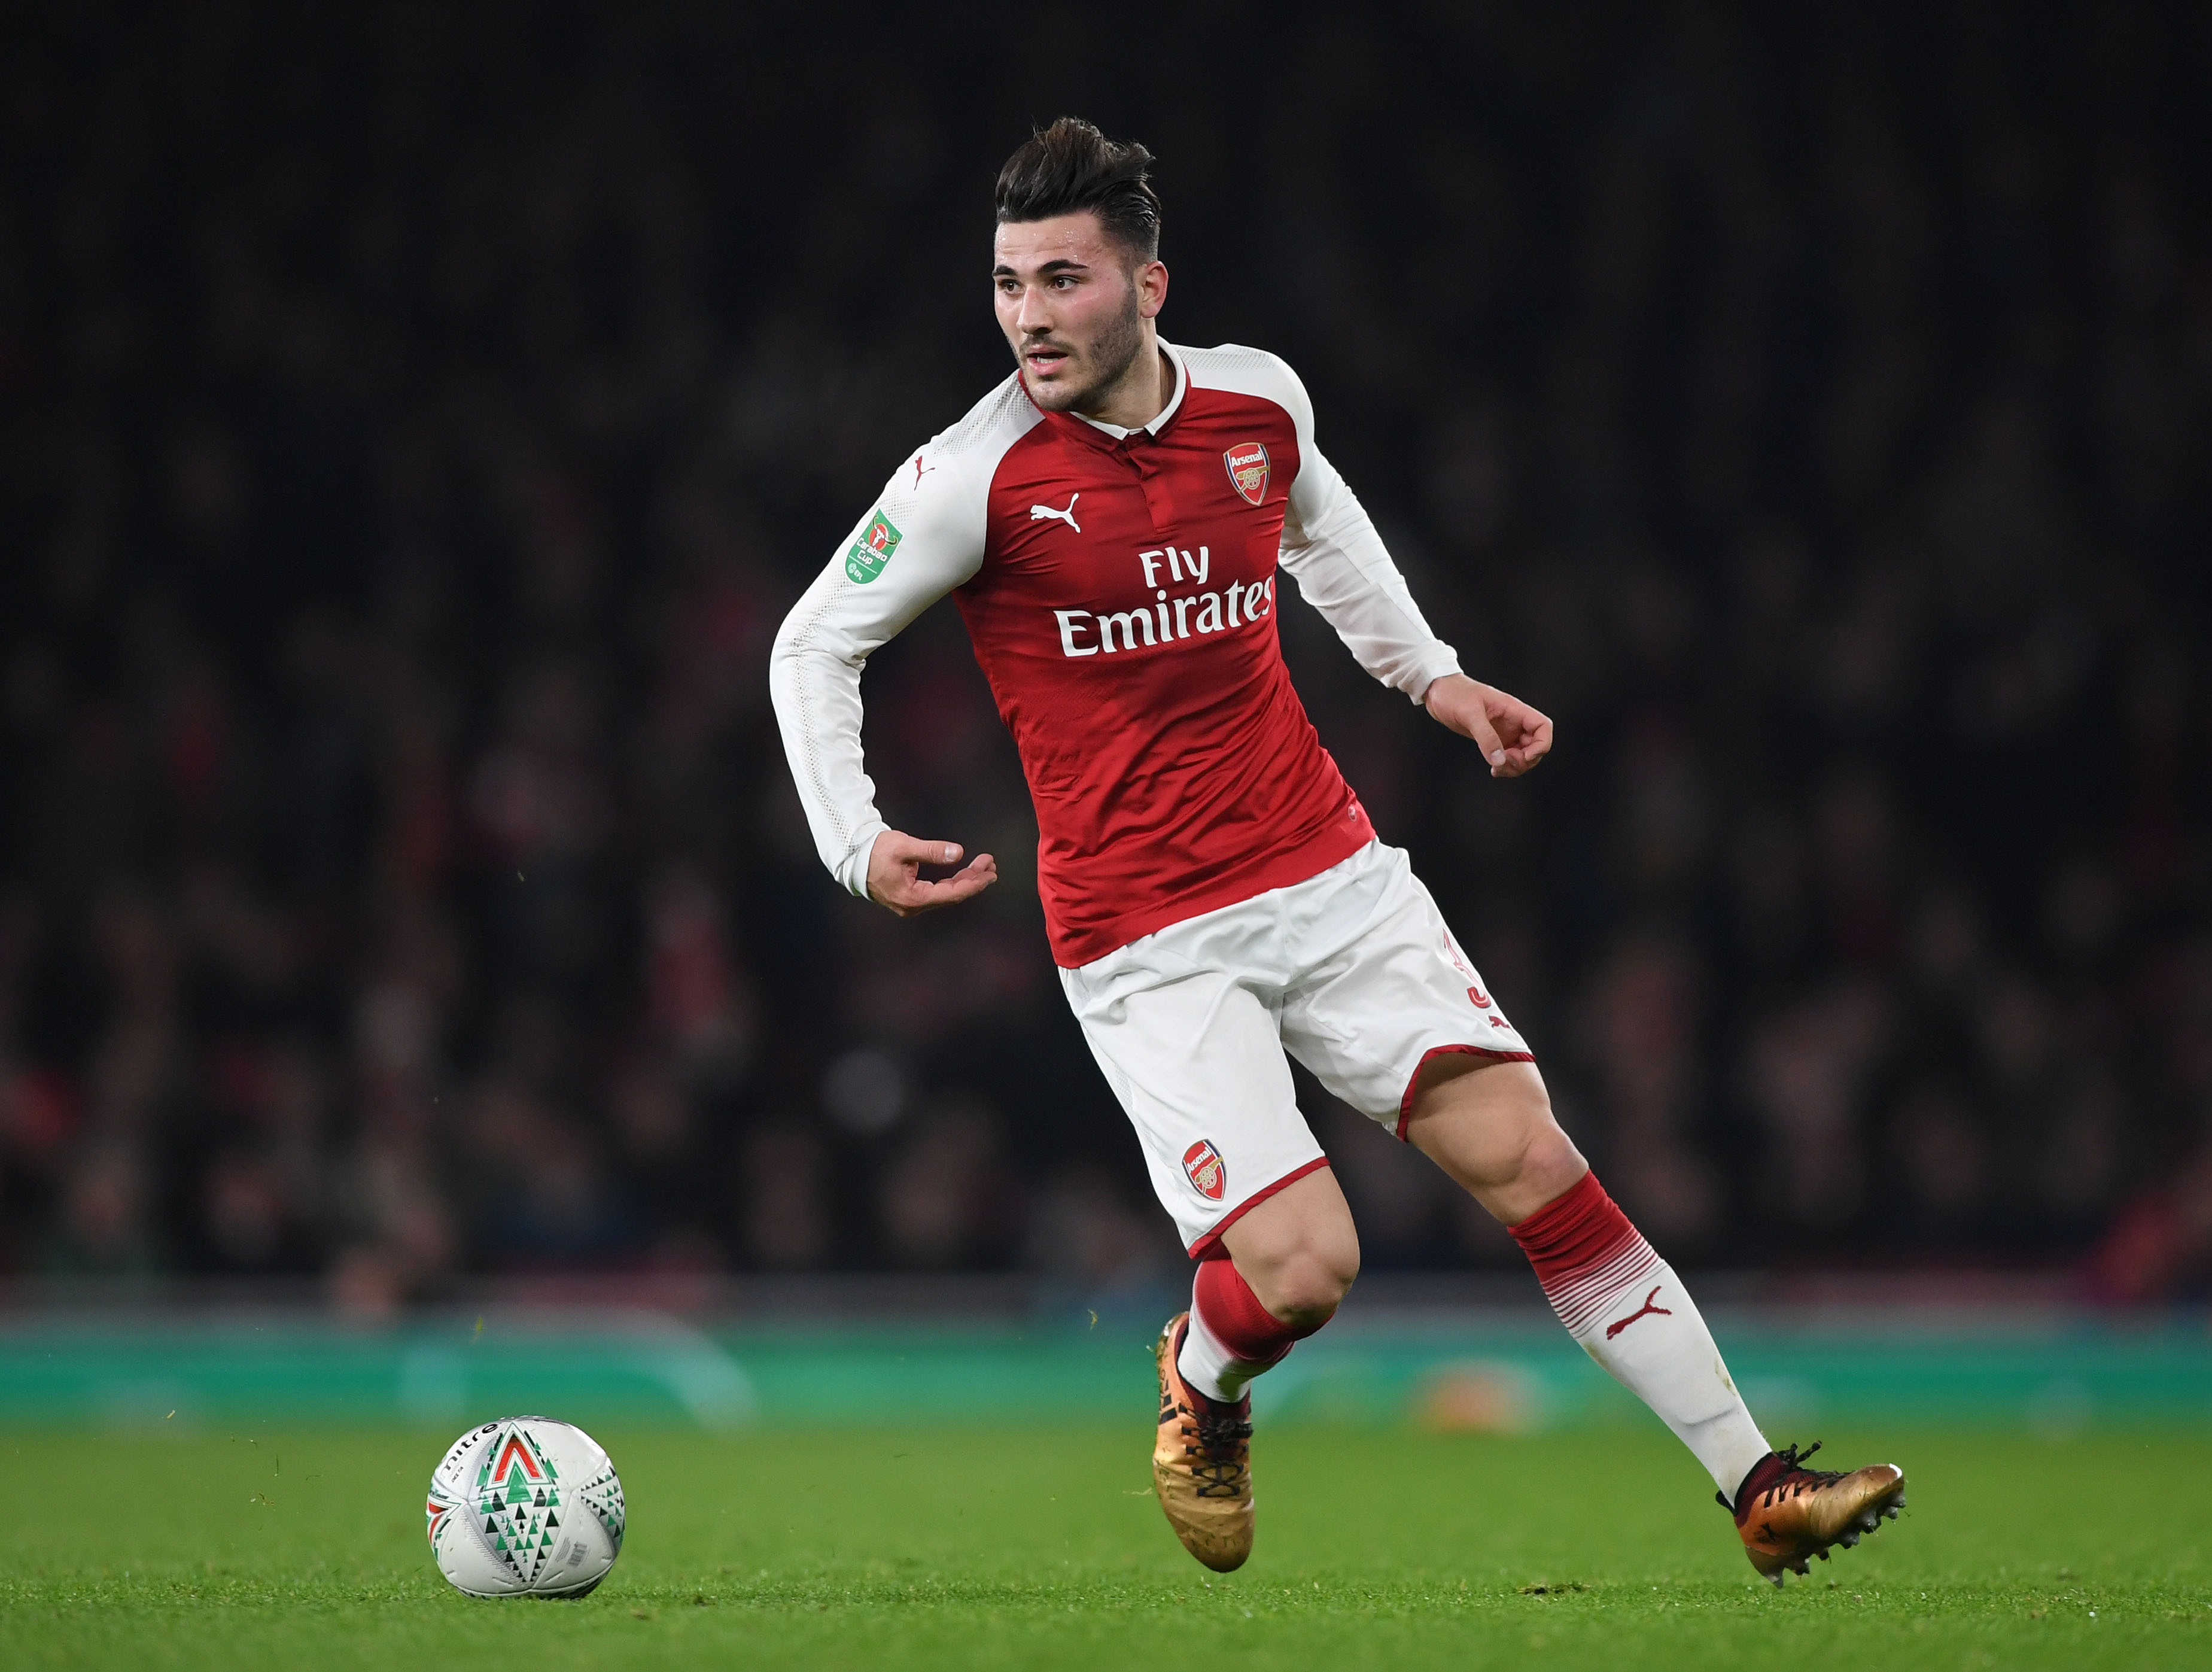 Arsenal vs Chelsea live stream, TV info Watch Carabao Cup online